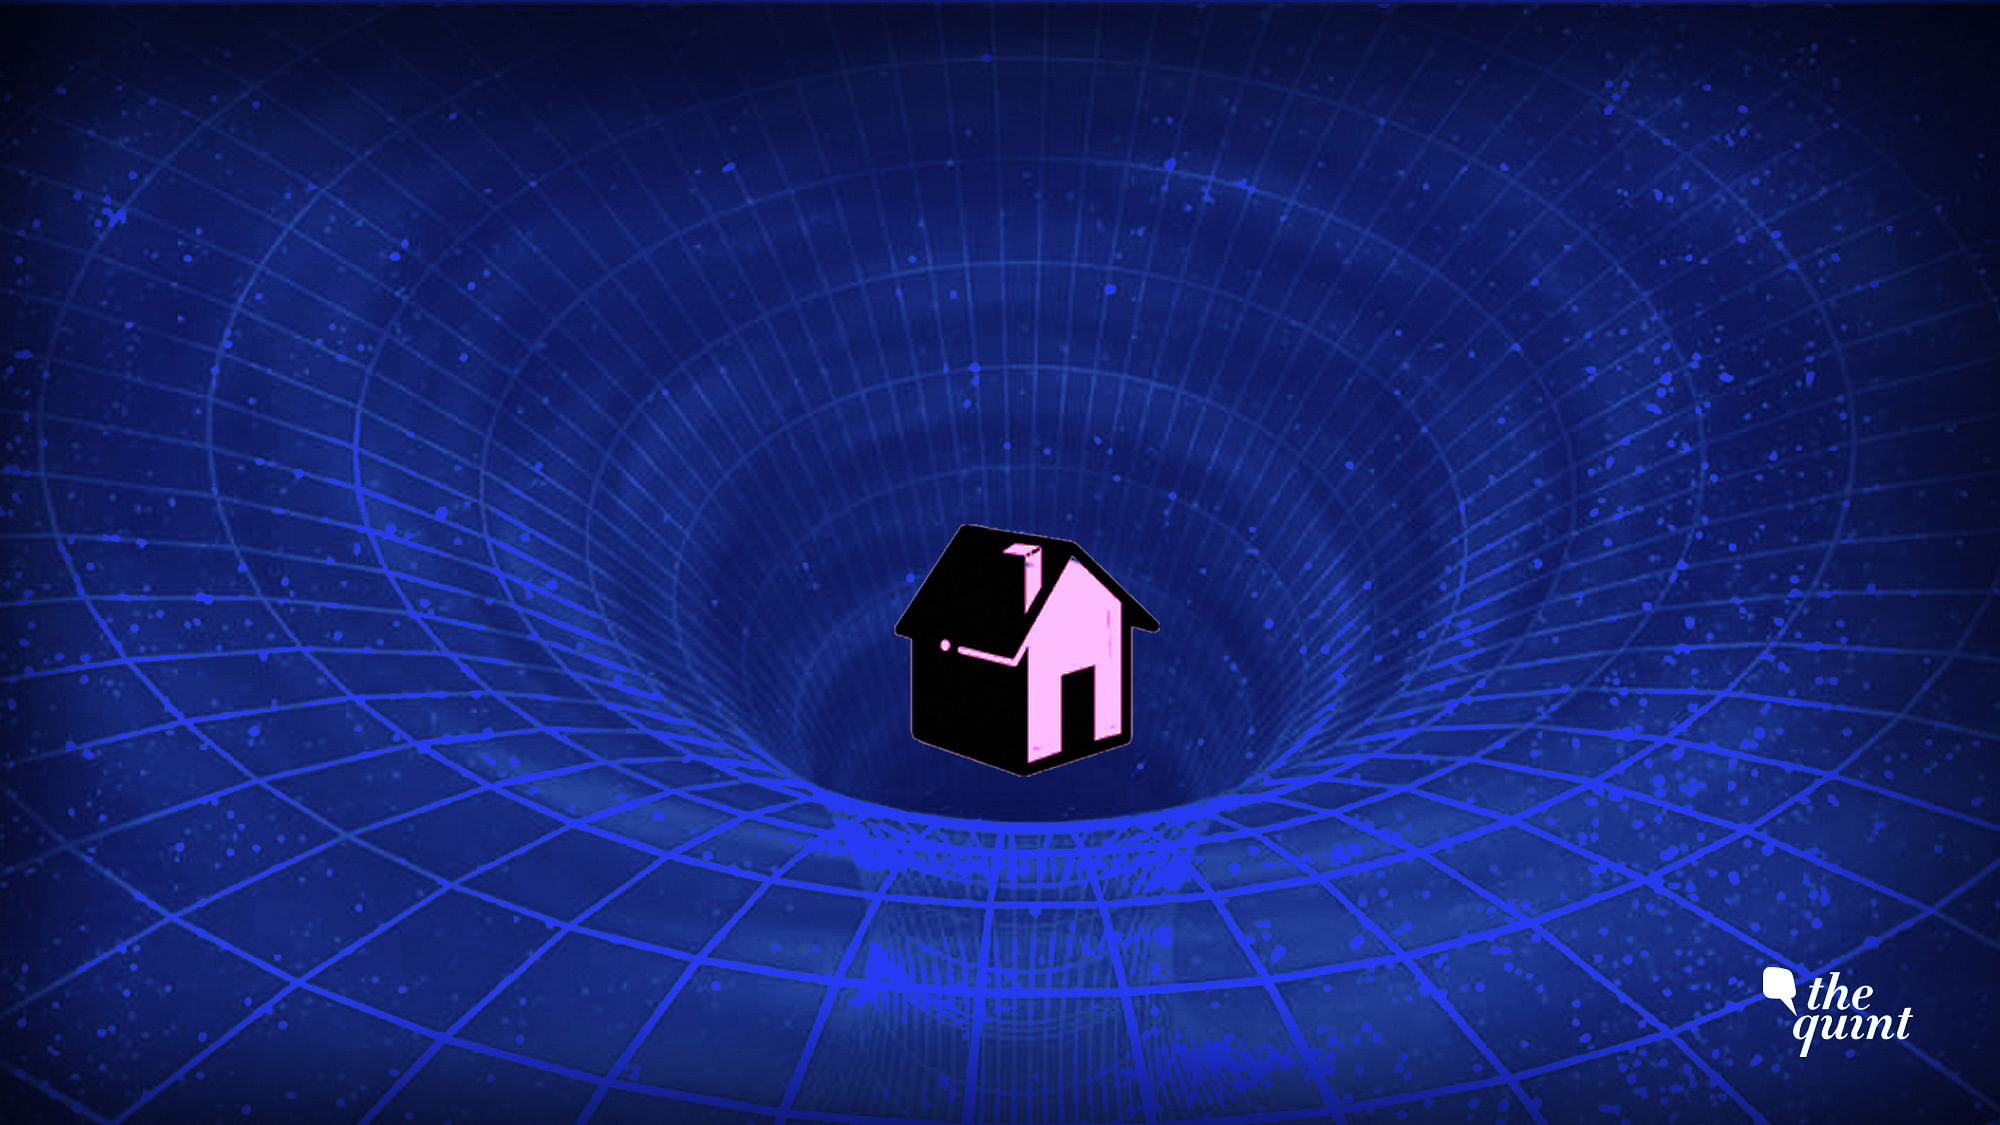 A representation of the mouth of a wormhole, originating at a house.